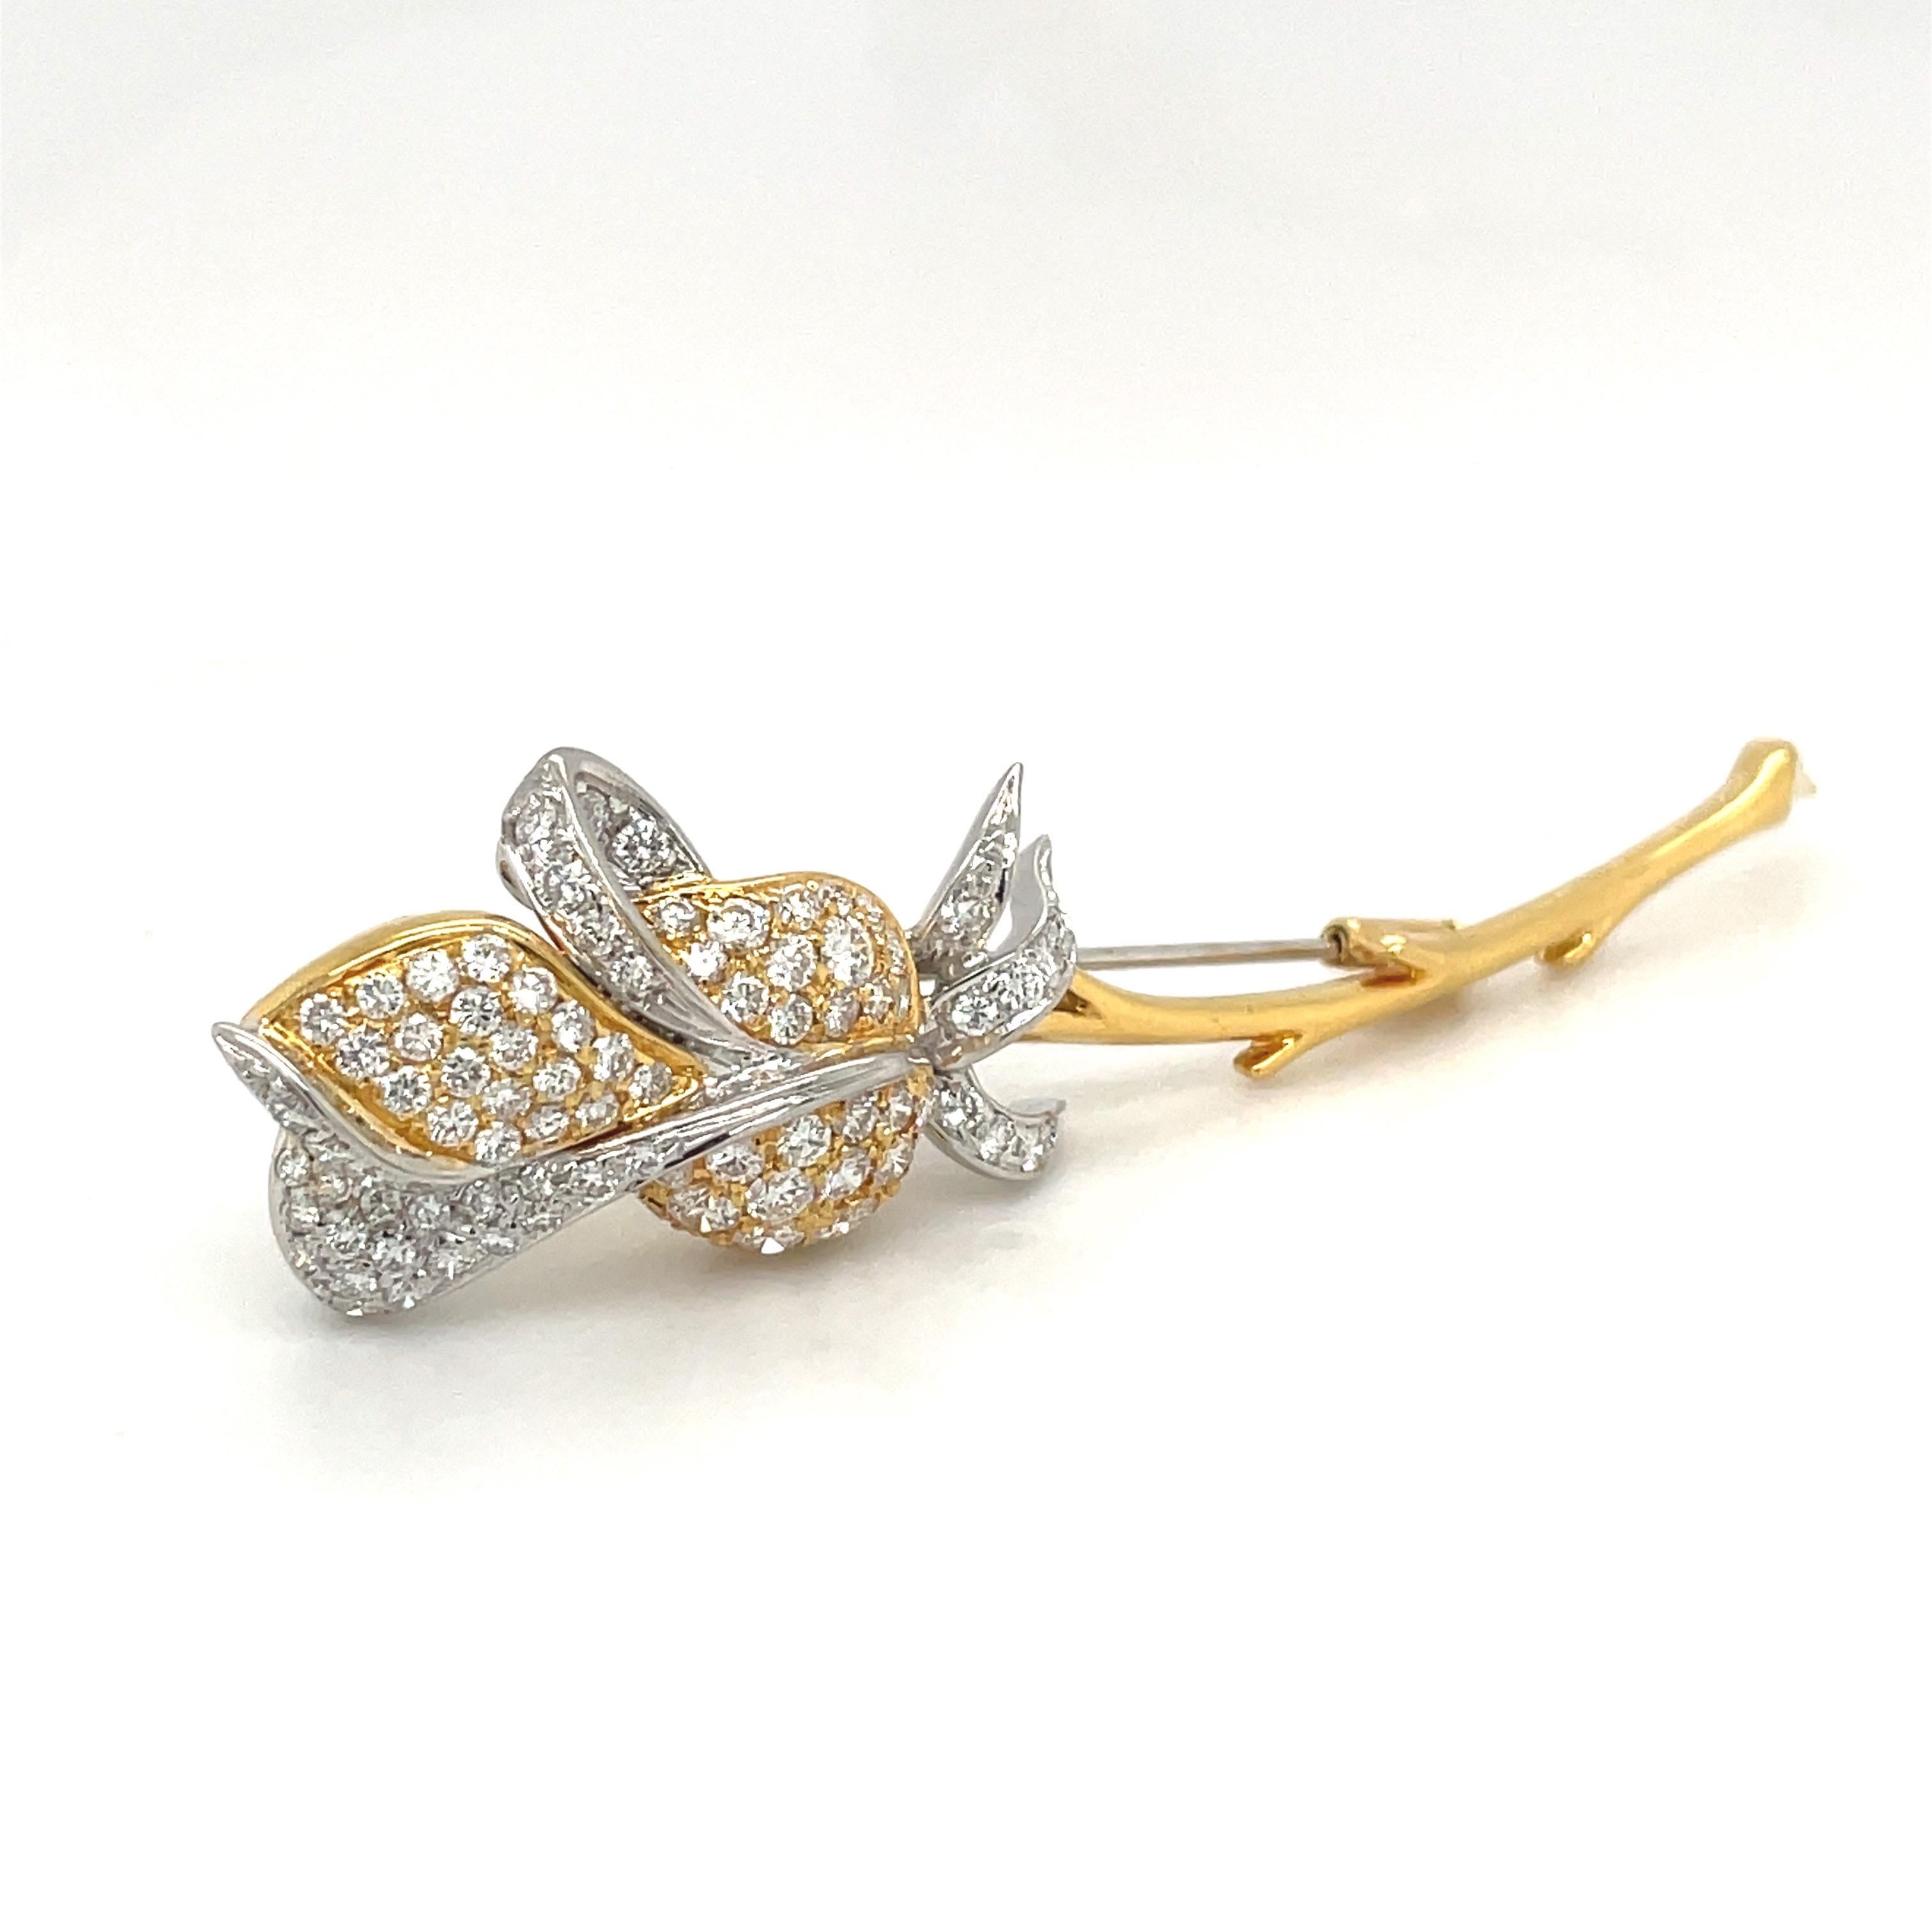 Designed in Italy by Leo Pizzo, this 18 karat yellow and white gold brooch is beautifully designed to depict a very graceful rose. The round brilliant diamonds are set in the combination of golds, giving depth to the elegant rose. The brooch